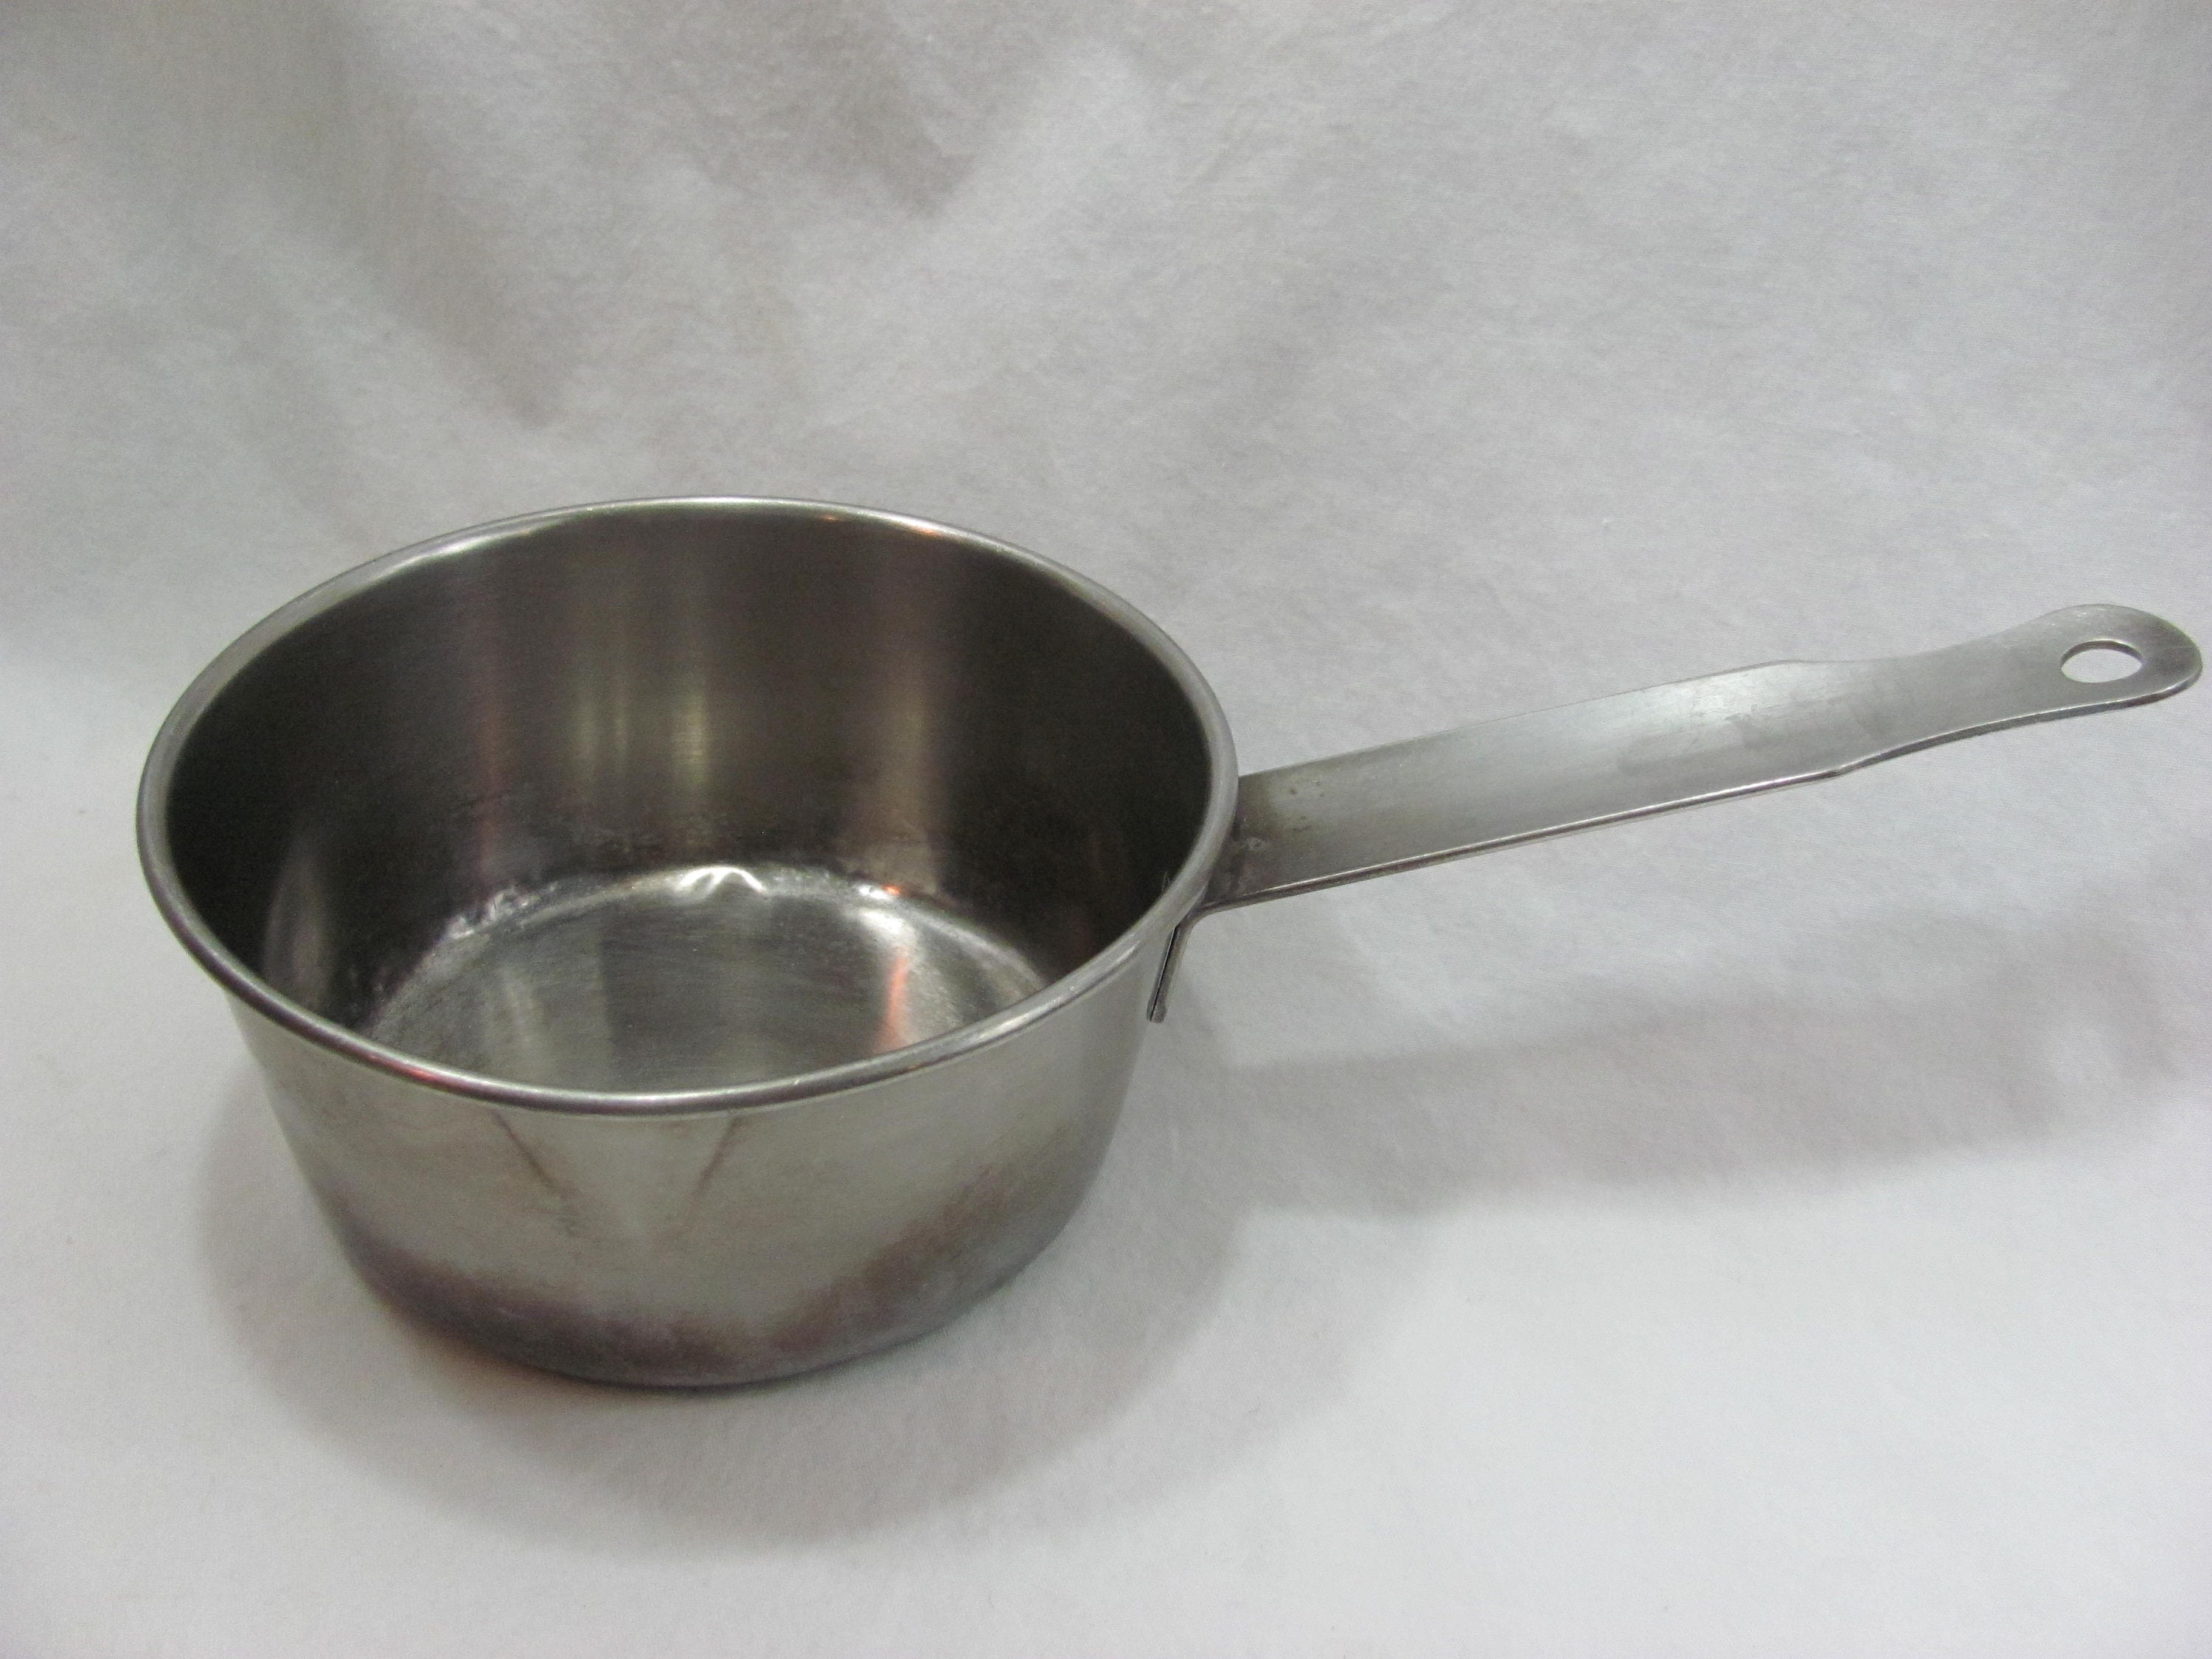 Nutri-seal 18-8 stainless steel Cookware made in USA 1qt saucepan